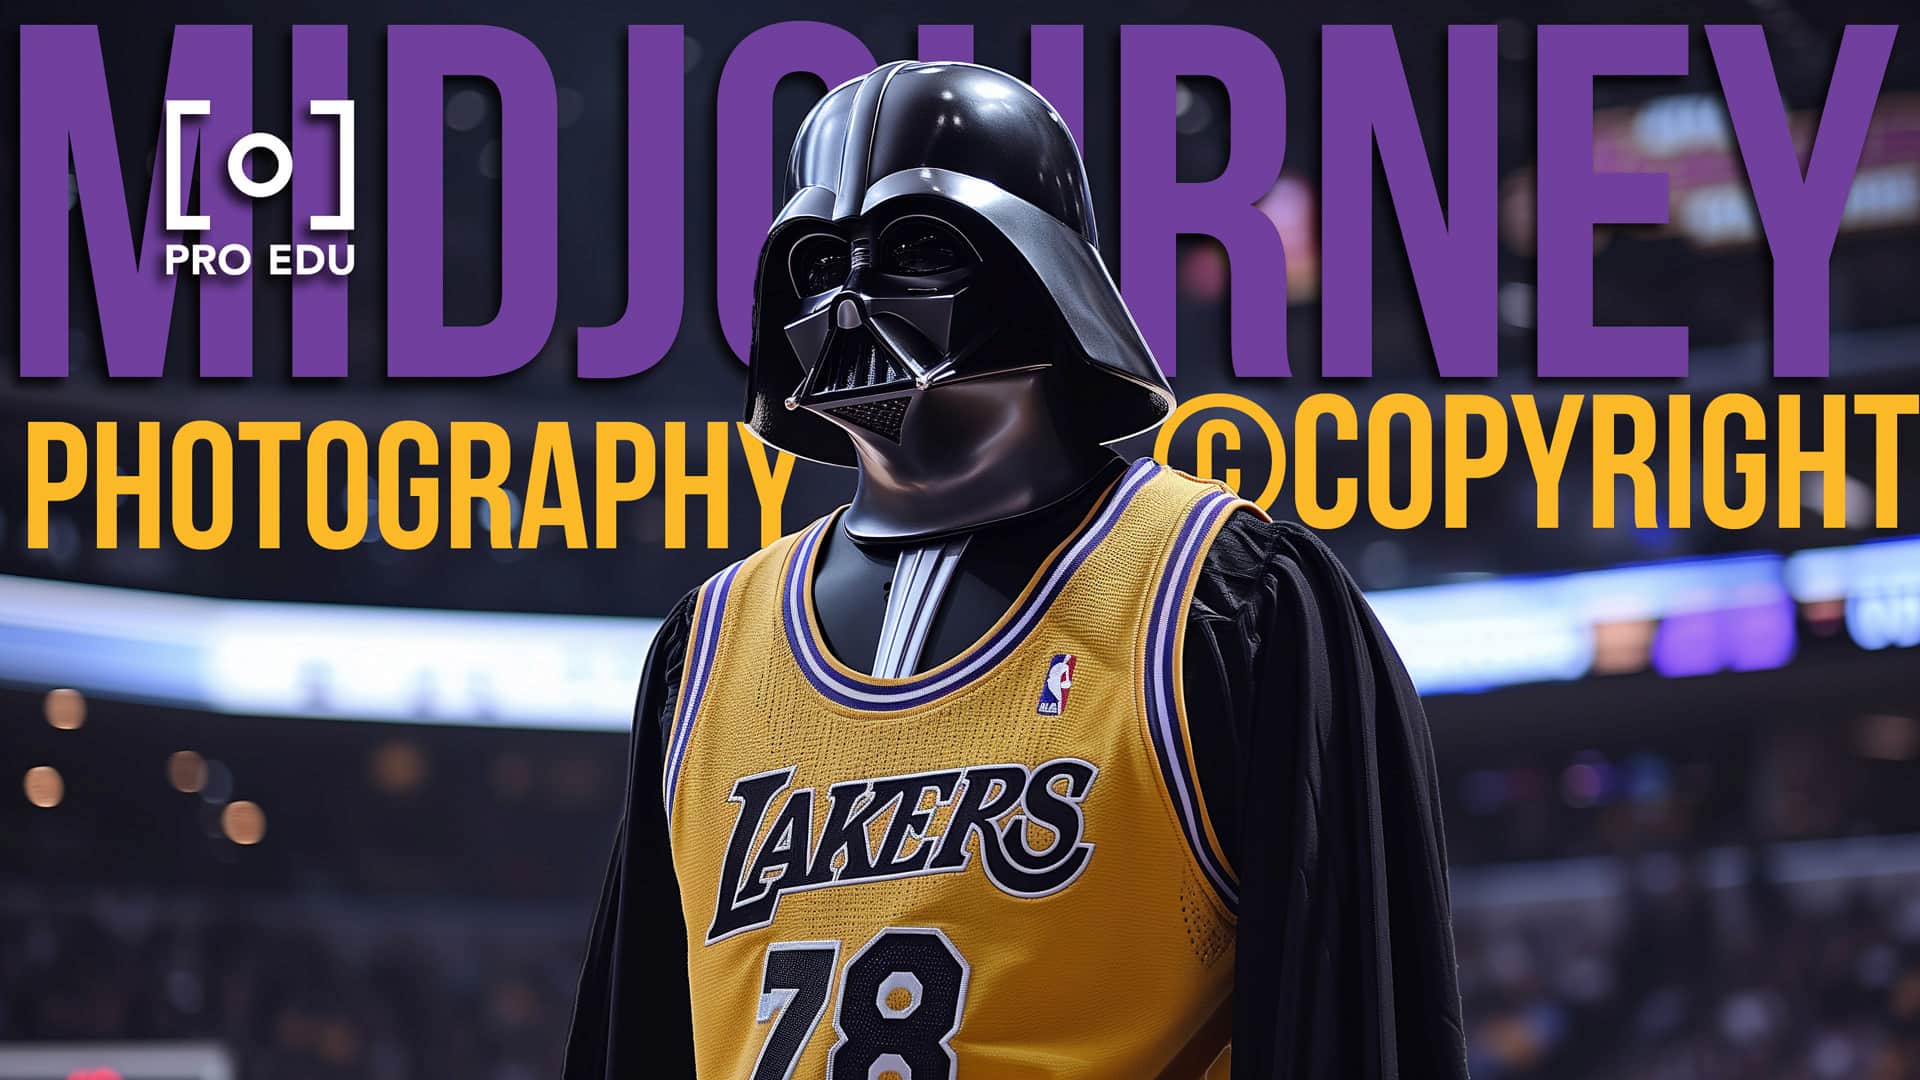 Darth Vader Image Of the Lakers Player Midjourney Copyright pro edu